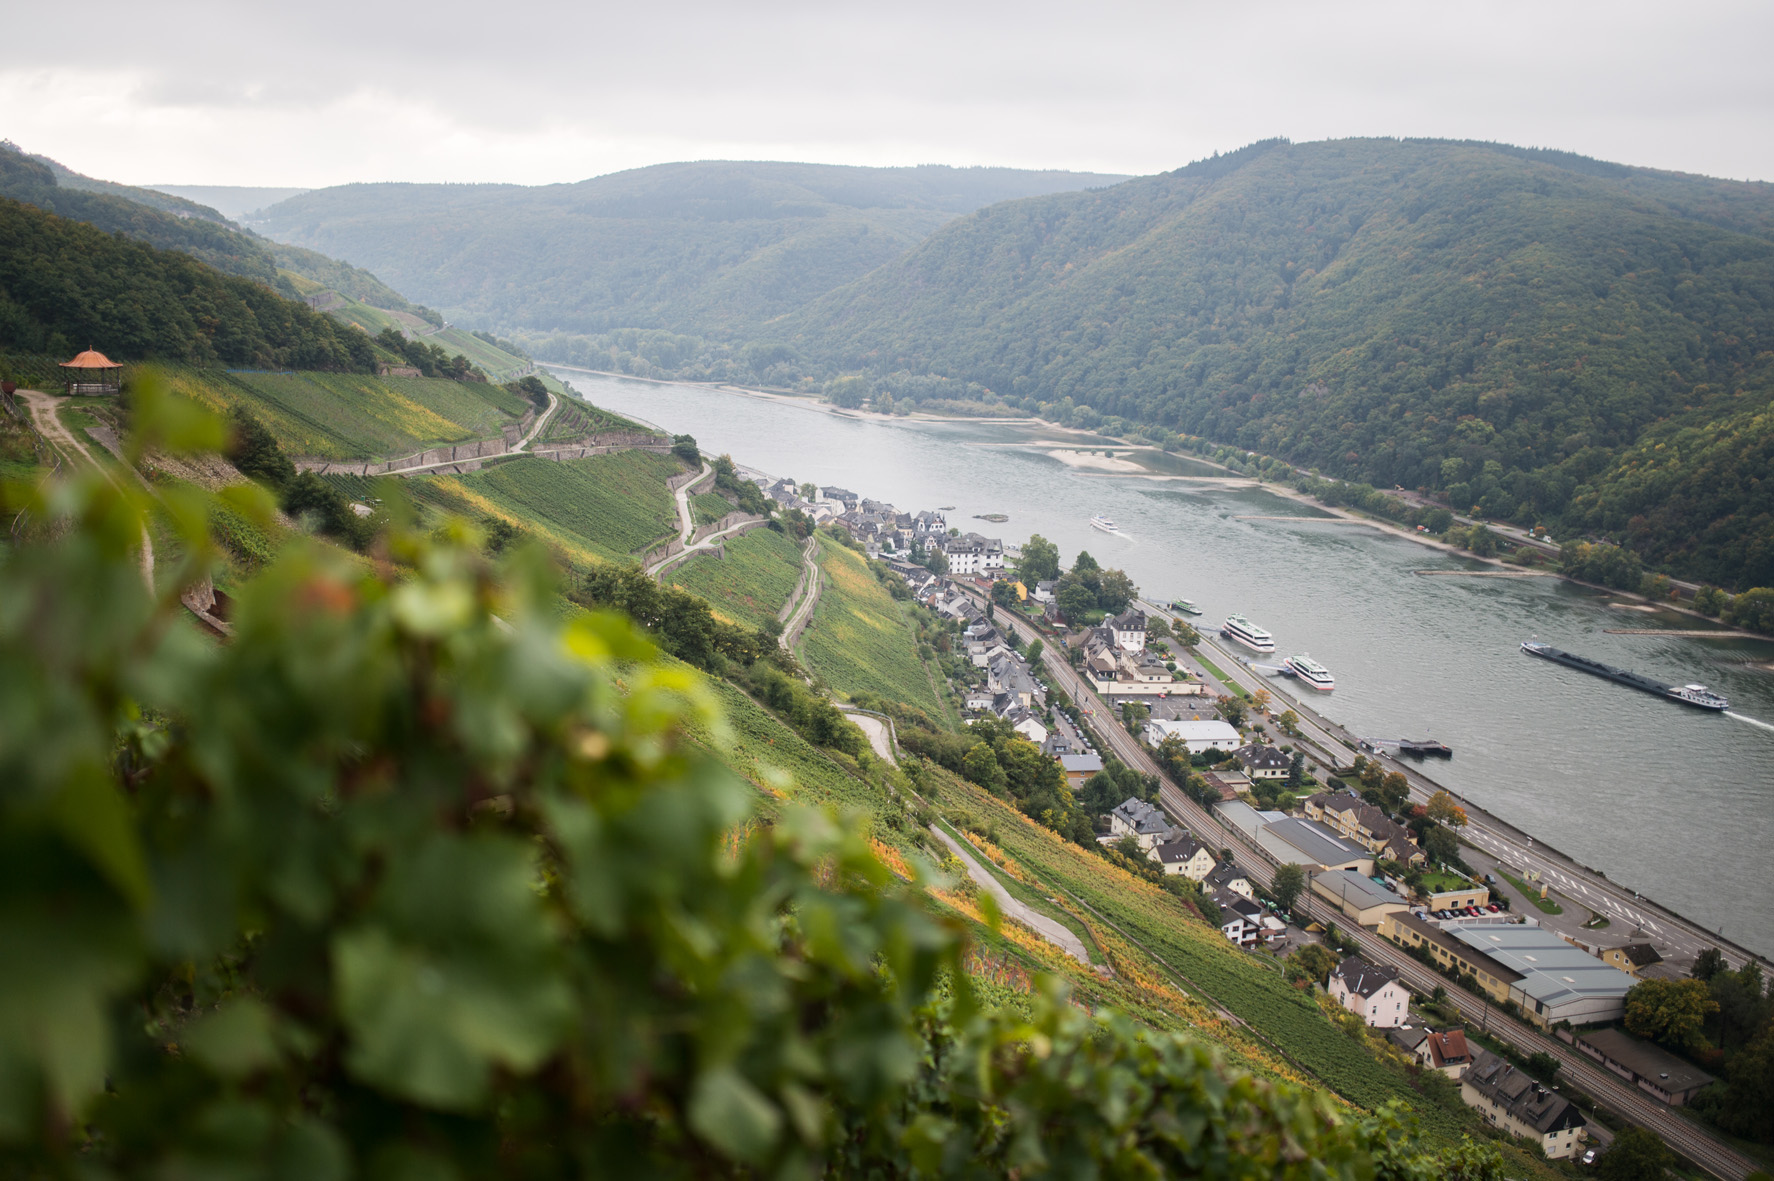 View of the Rhine river and sloping vineyards from the Rheinsteig Hiking Trail